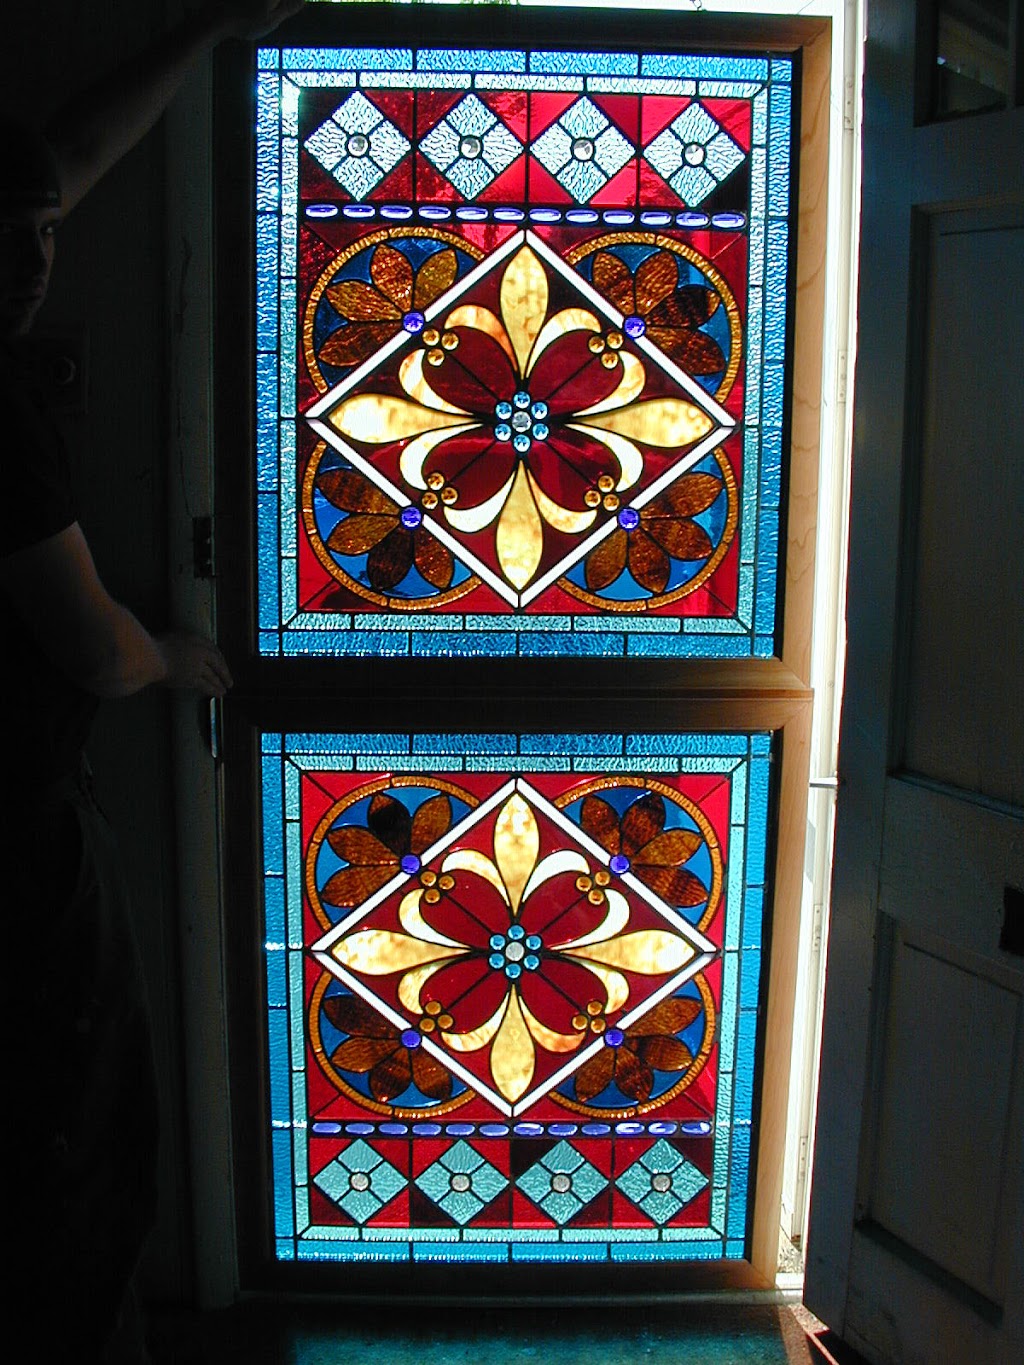 Castle Studio Stained Glass | 1333 E Prospect Ave, North Wales, PA 19454 | Phone: (215) 699-0400